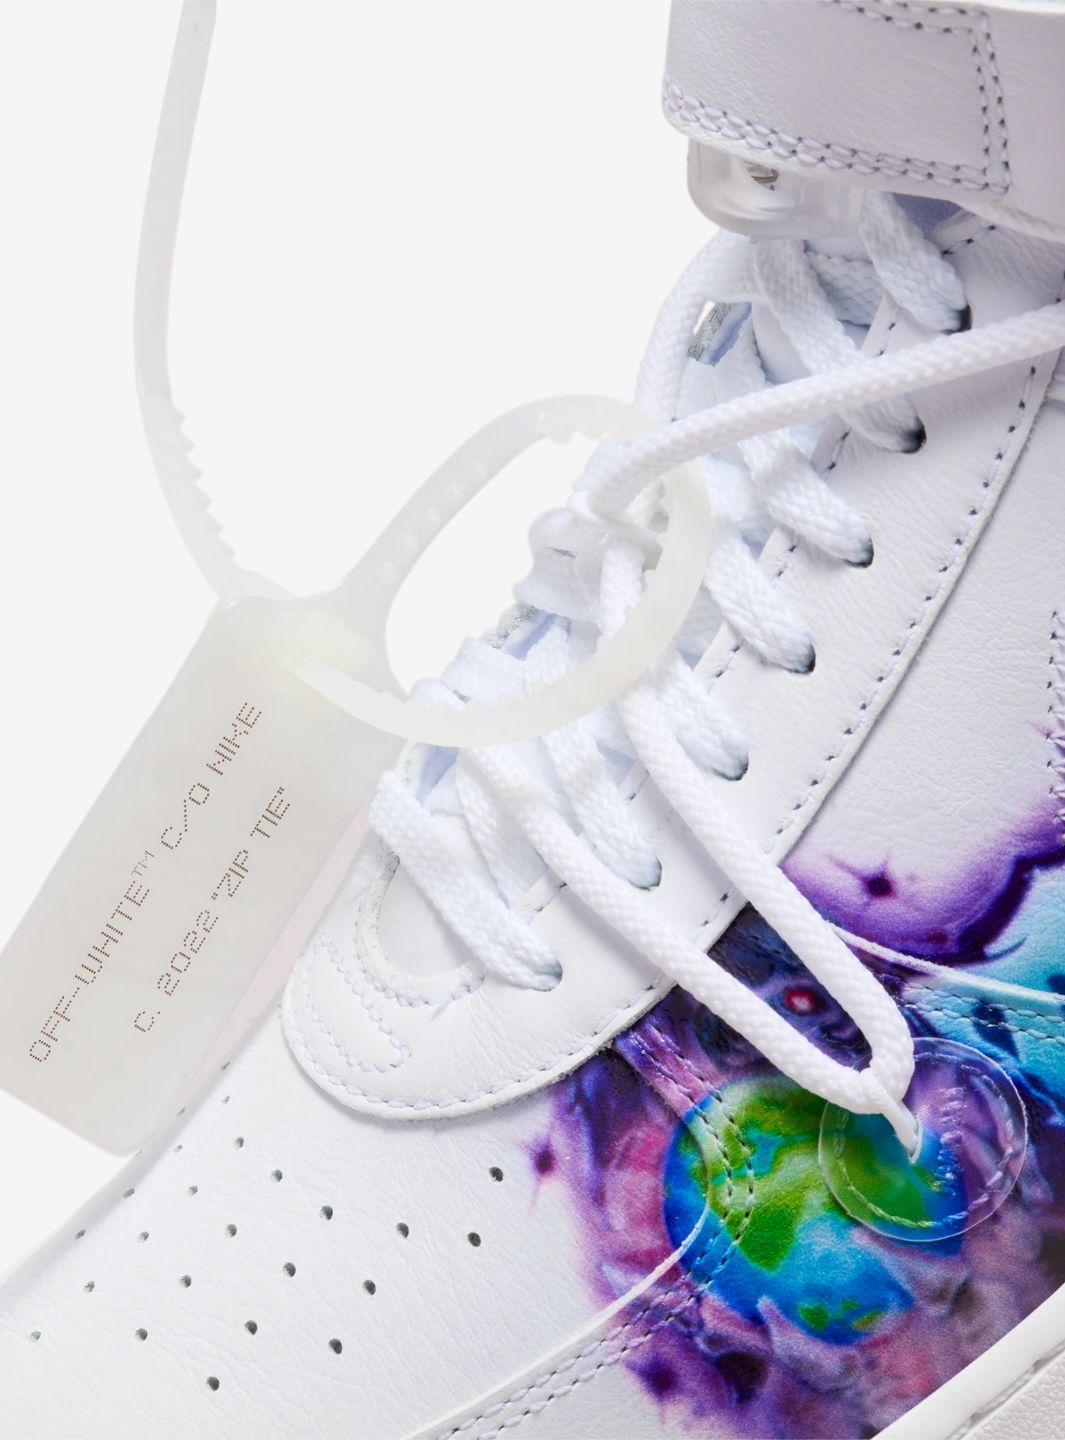 Nike Air Force 1 Mid Off-White Graffiti White - DR0500-100 | ResellZone